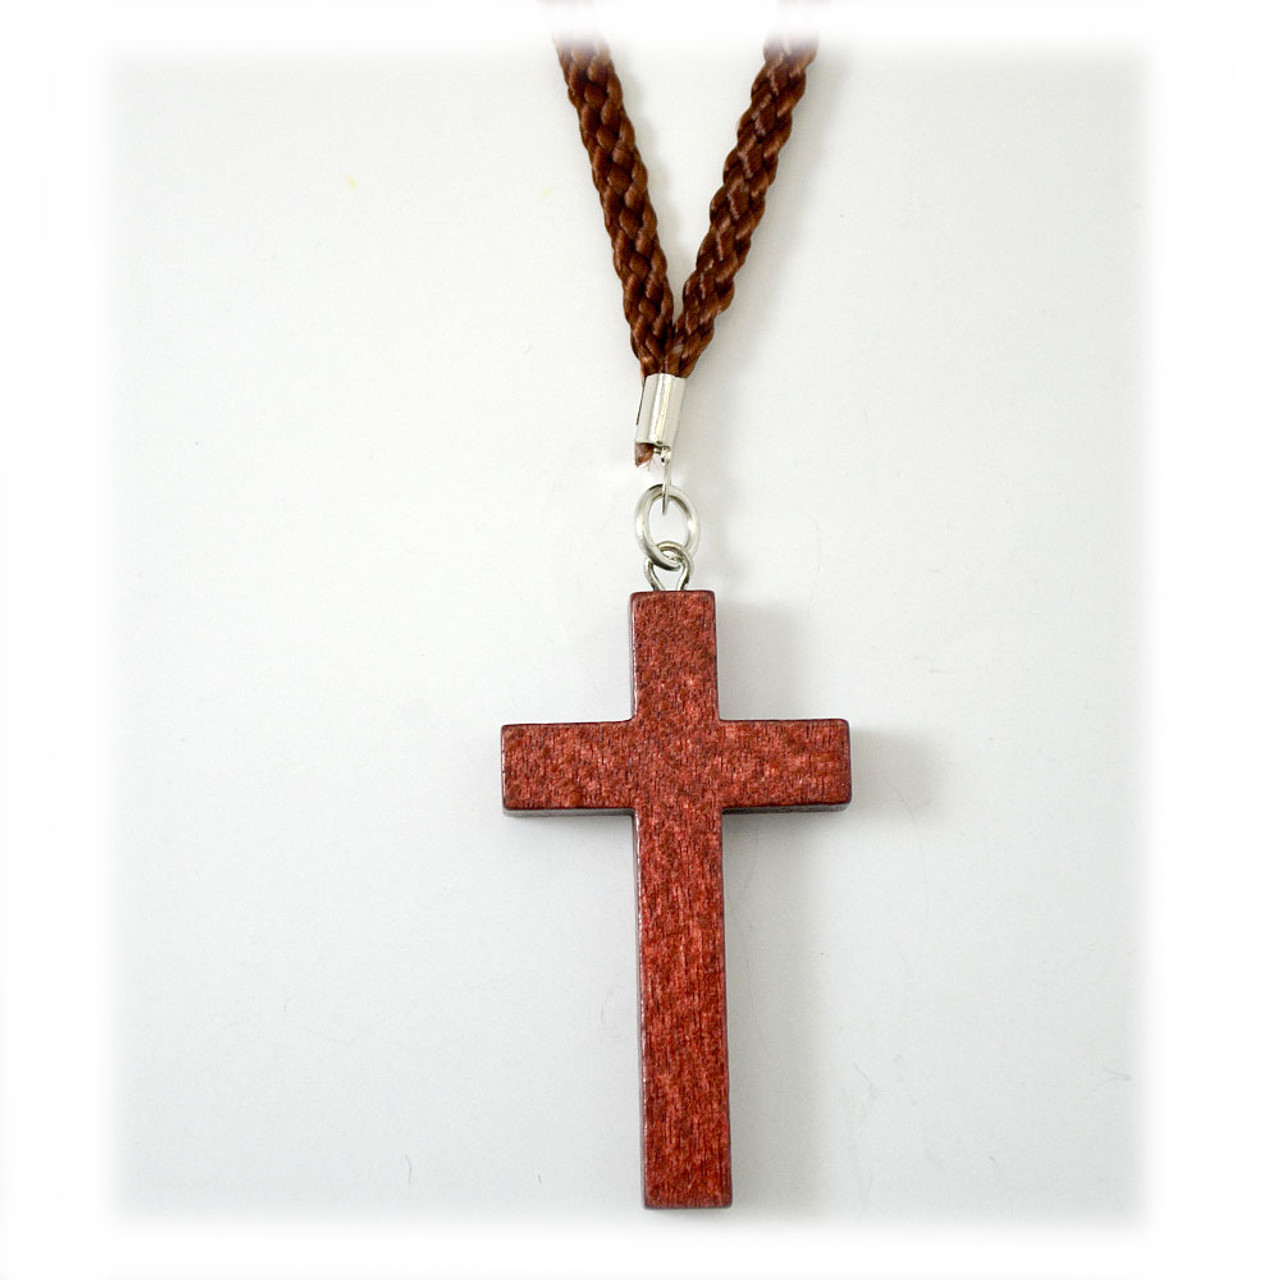 Catholic Inri Crucifix Necklace For Men Religious Small Wood Cross Necklace  Pendant Jewelry Adjustable Rope Chains Nc219 - Necklace - AliExpress